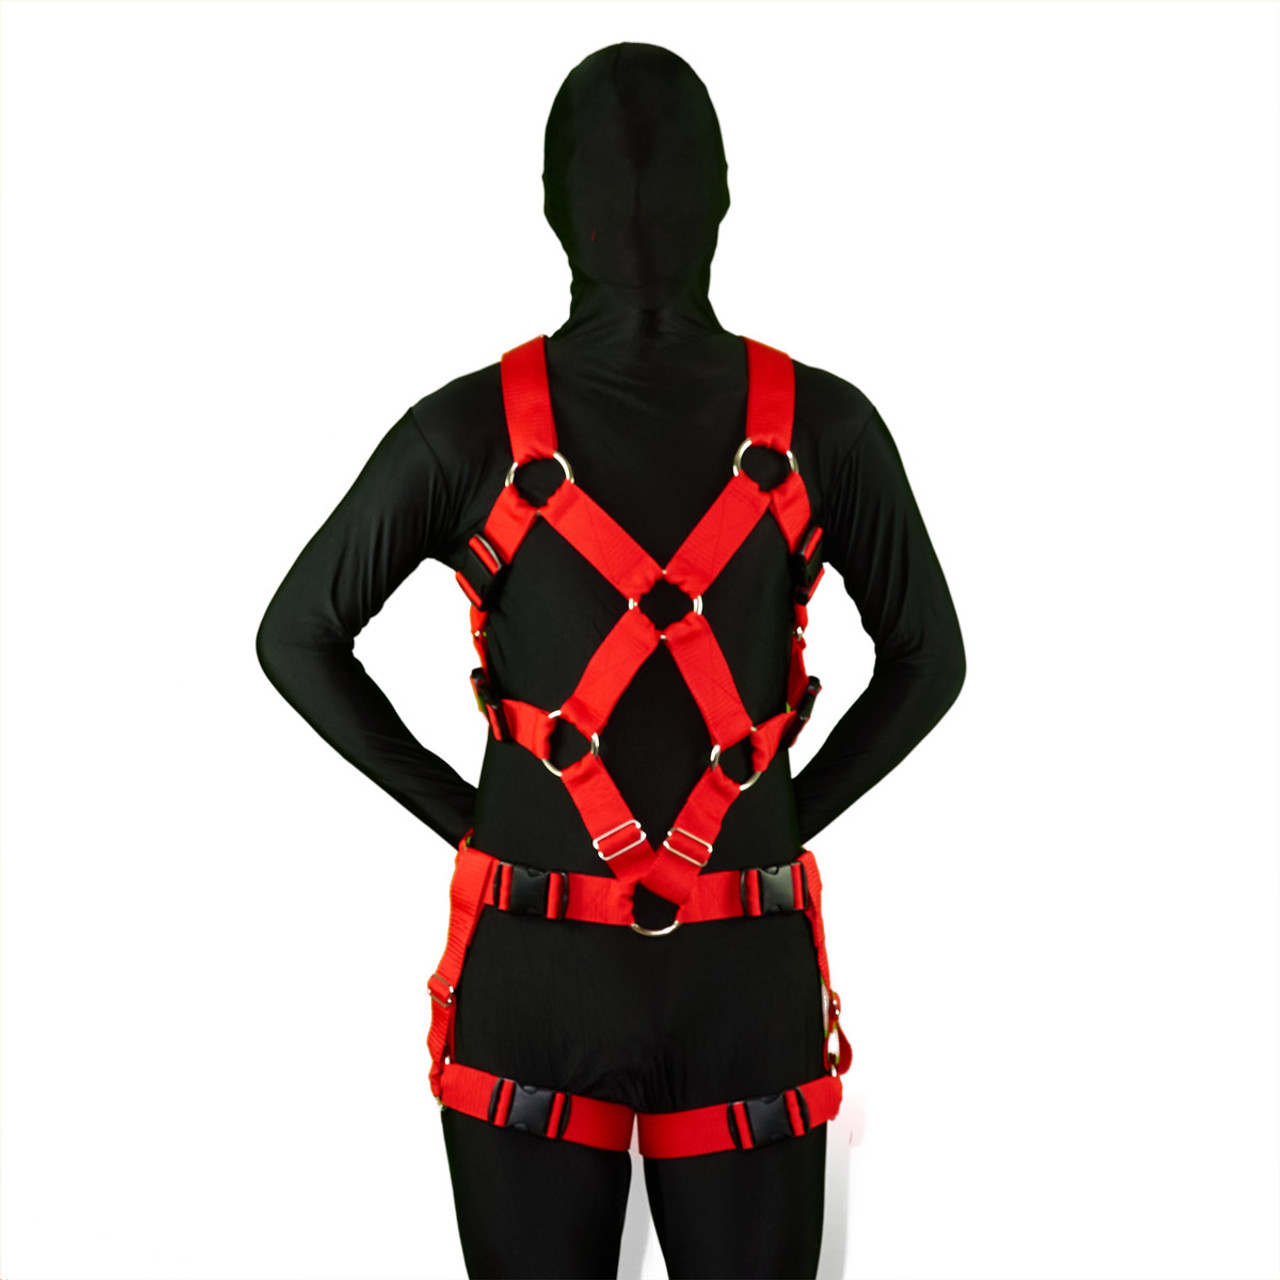 Full X-Chest Harness with Leg-Straps (Detachable)